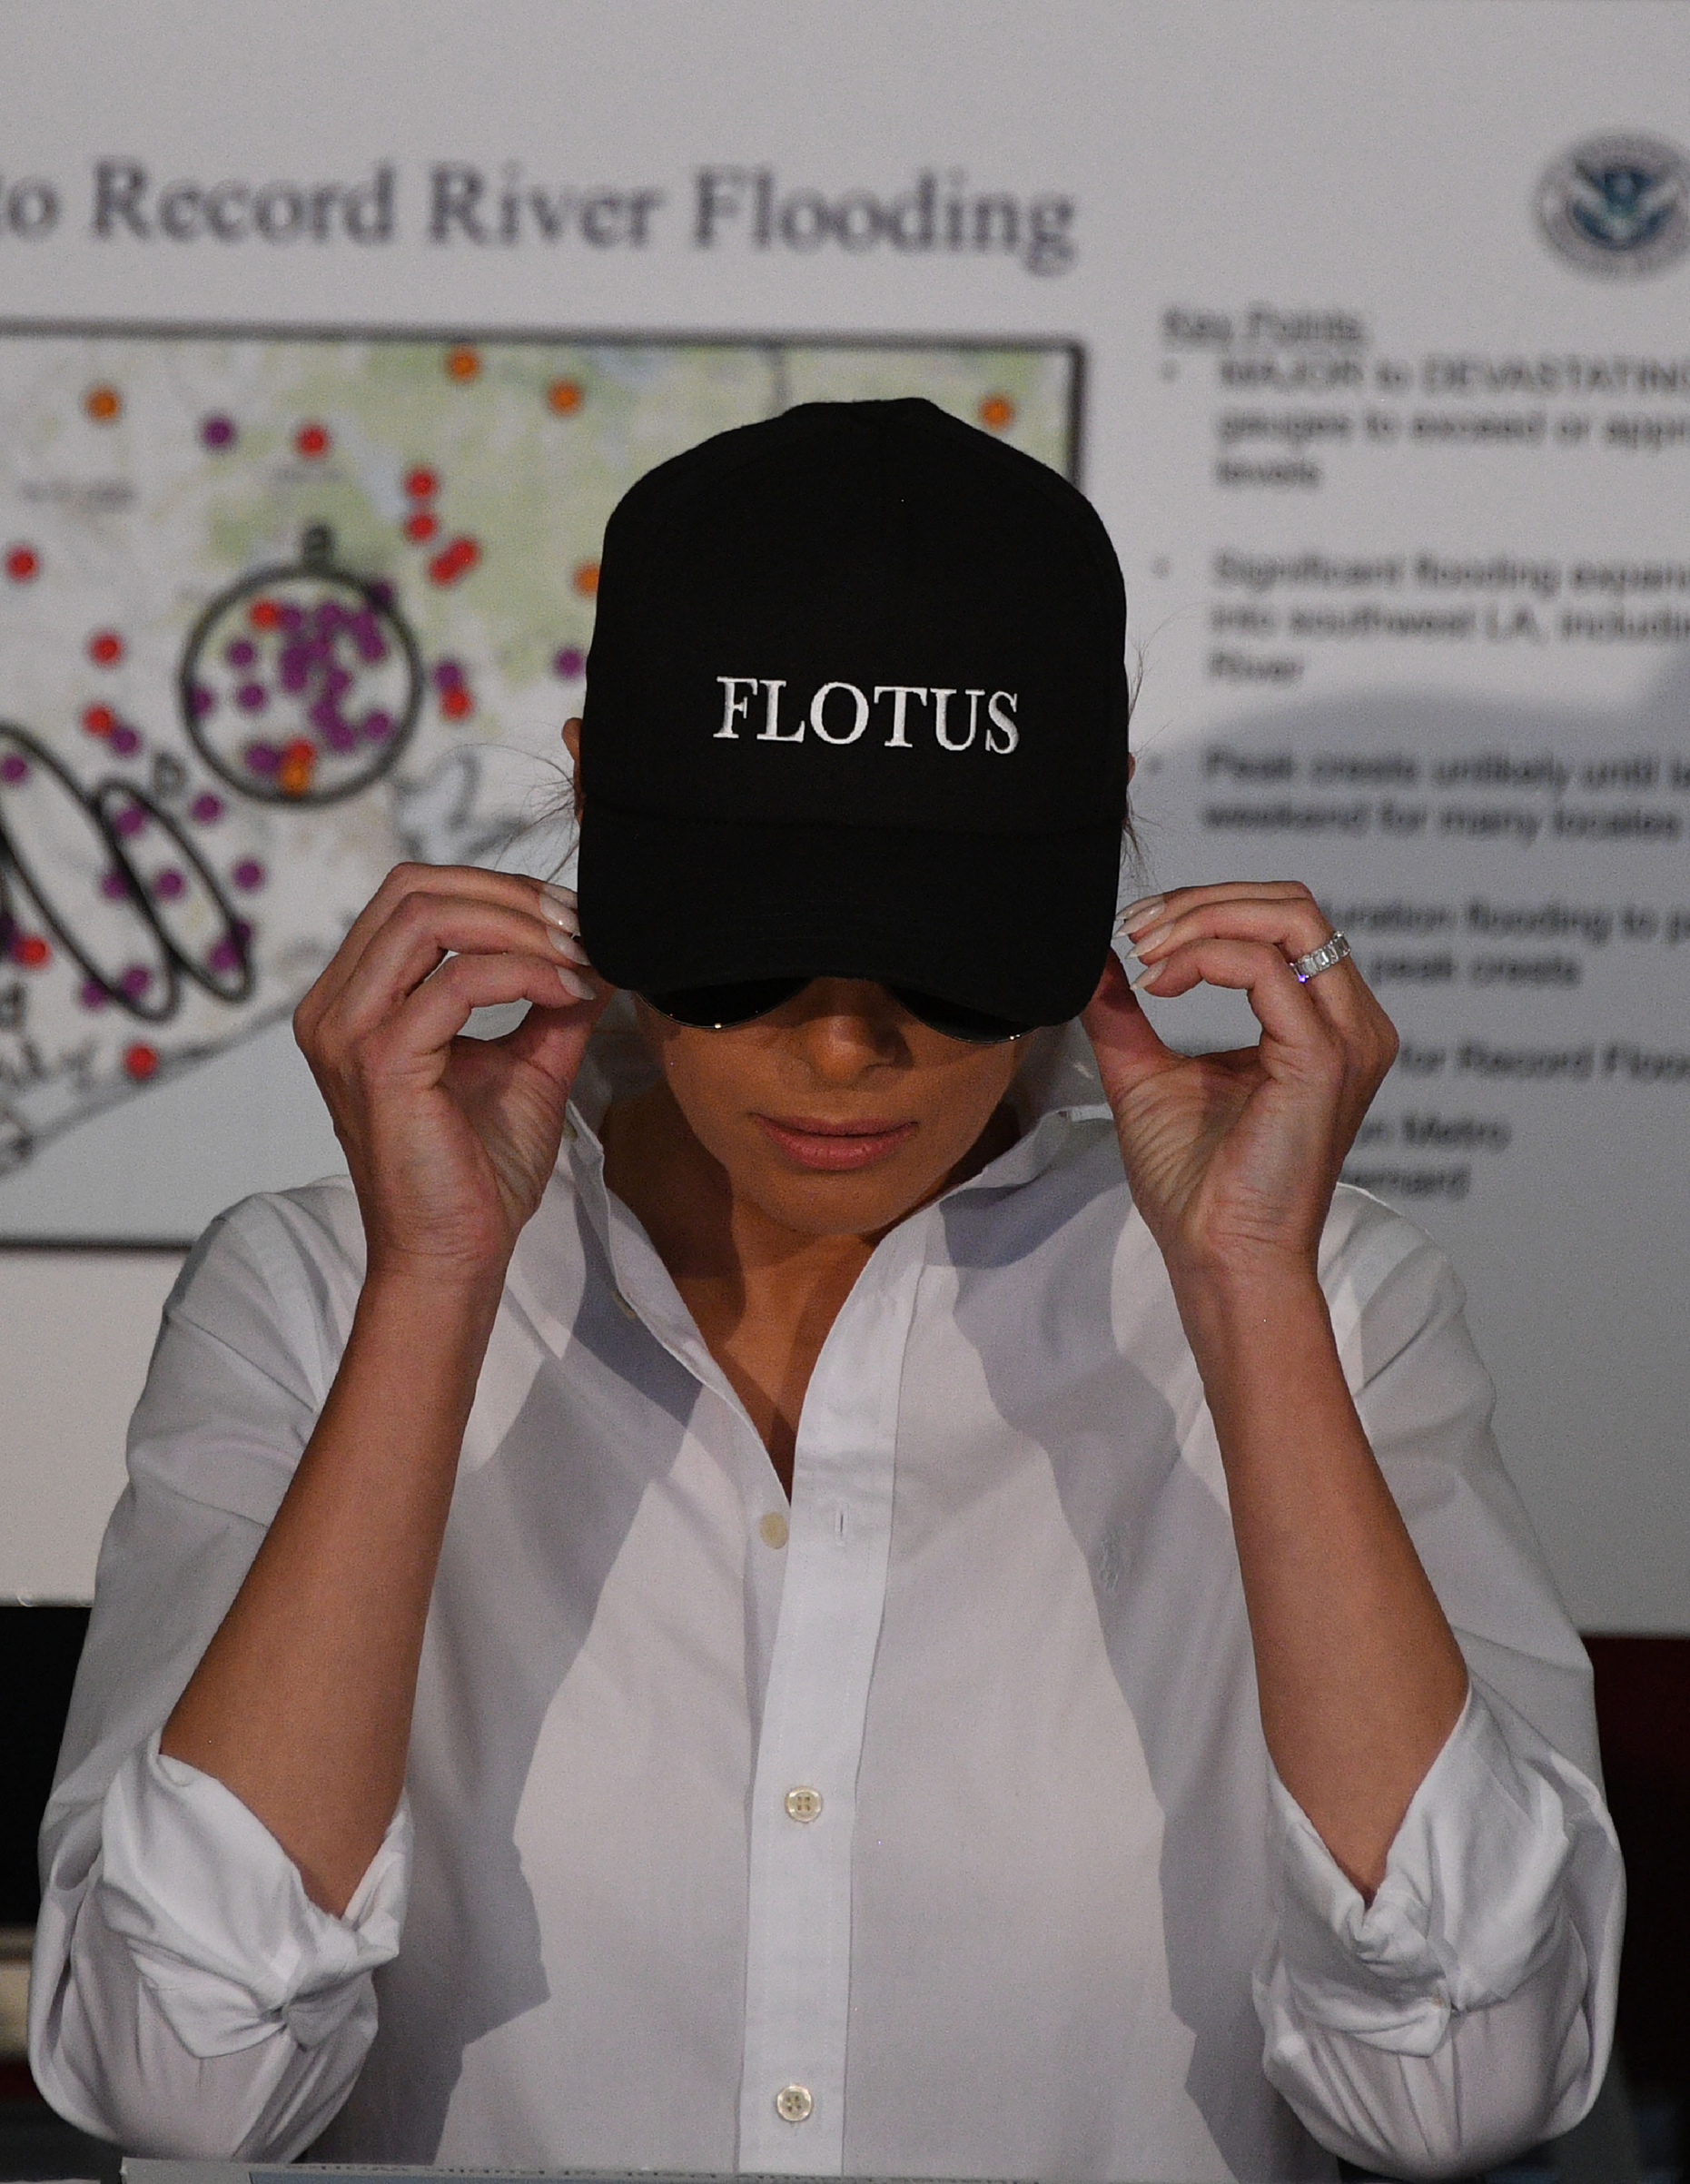 First lady Melania Trump wearing a cap that says  FLOTUS  listens during a firehouse briefing on Hurricane Harvey in Corpus Christi, Texas on Aug. 29, 2017.